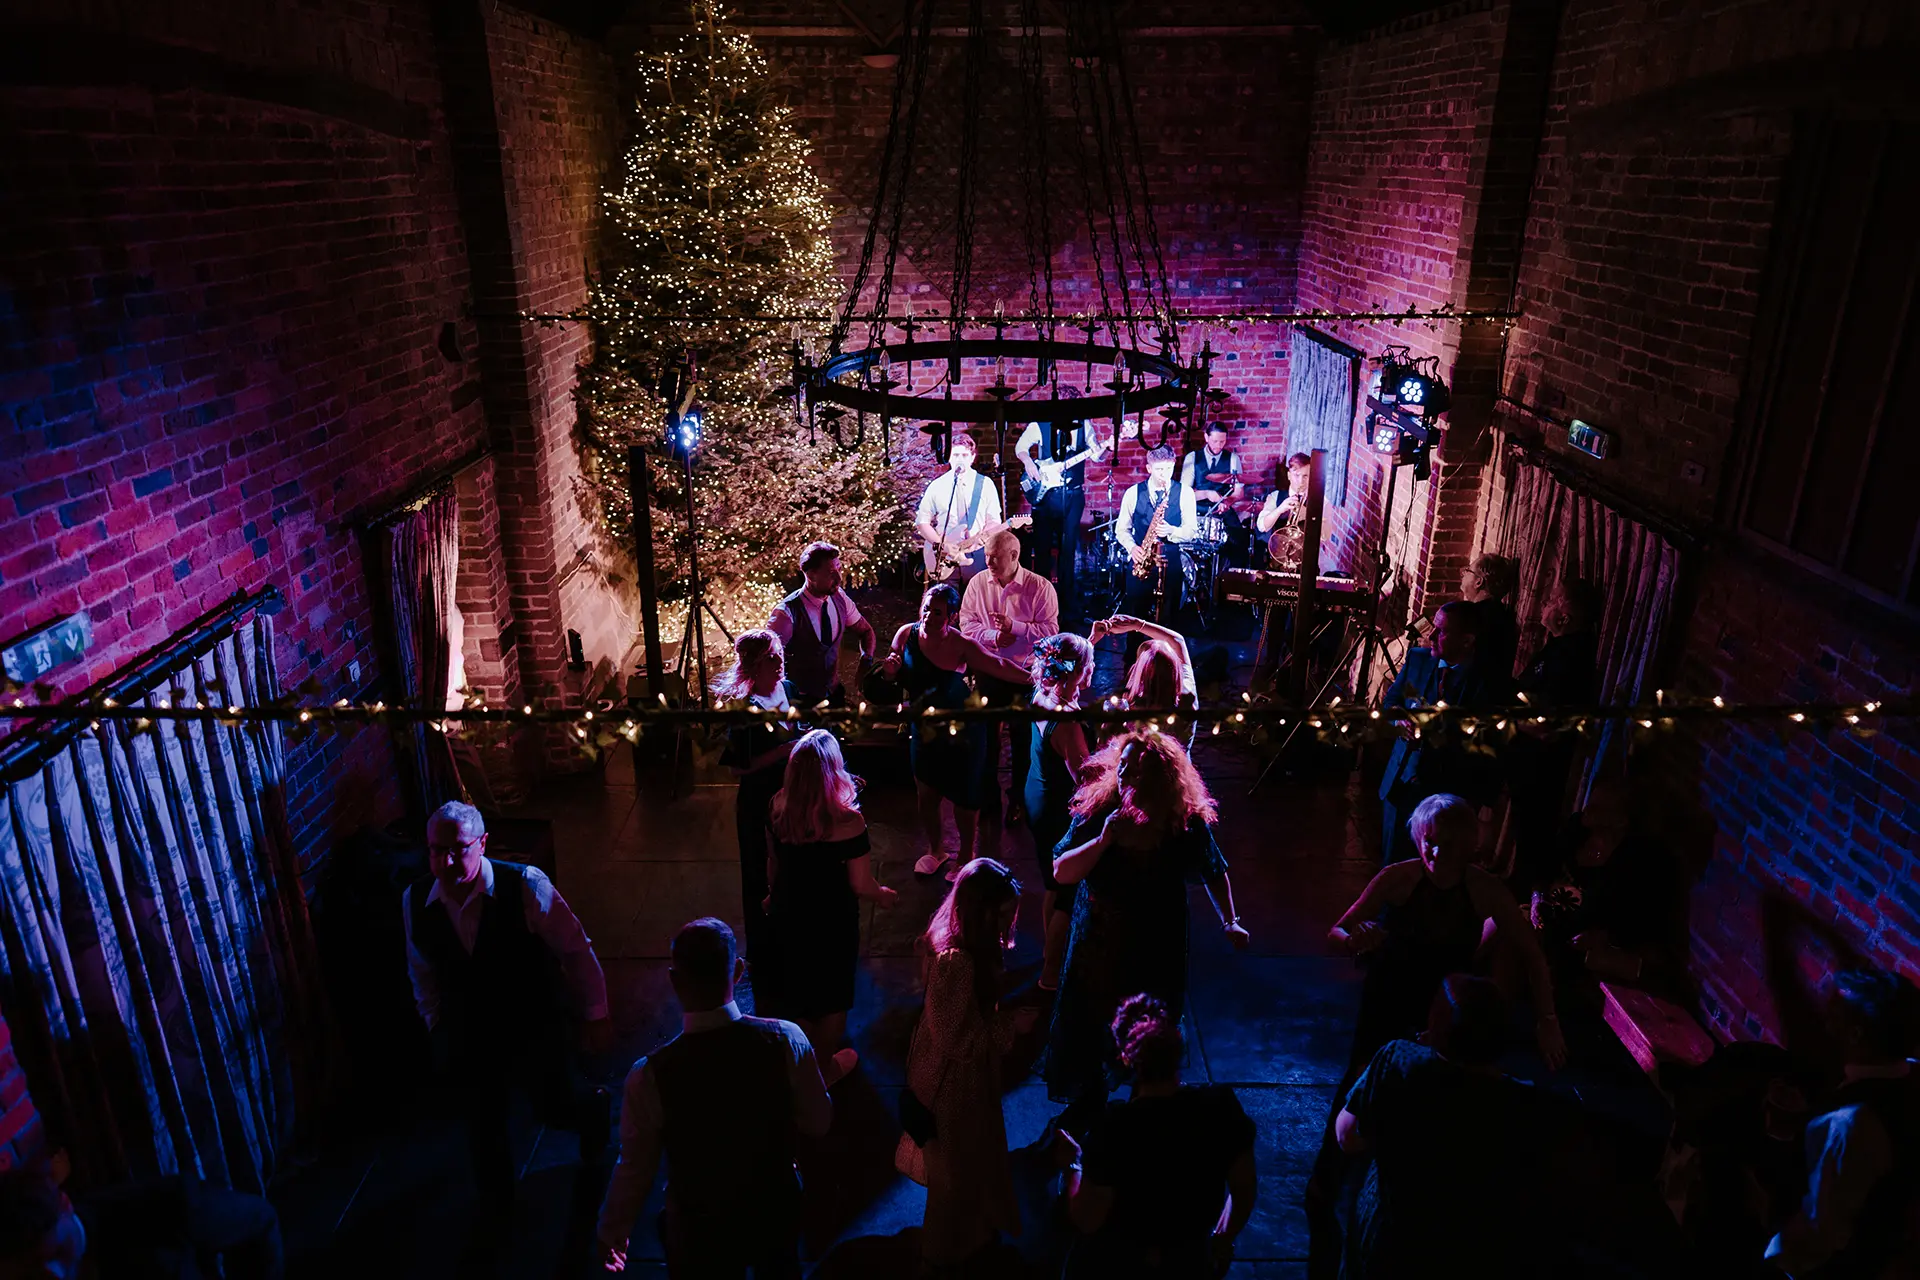 guests dancing in the granary barn